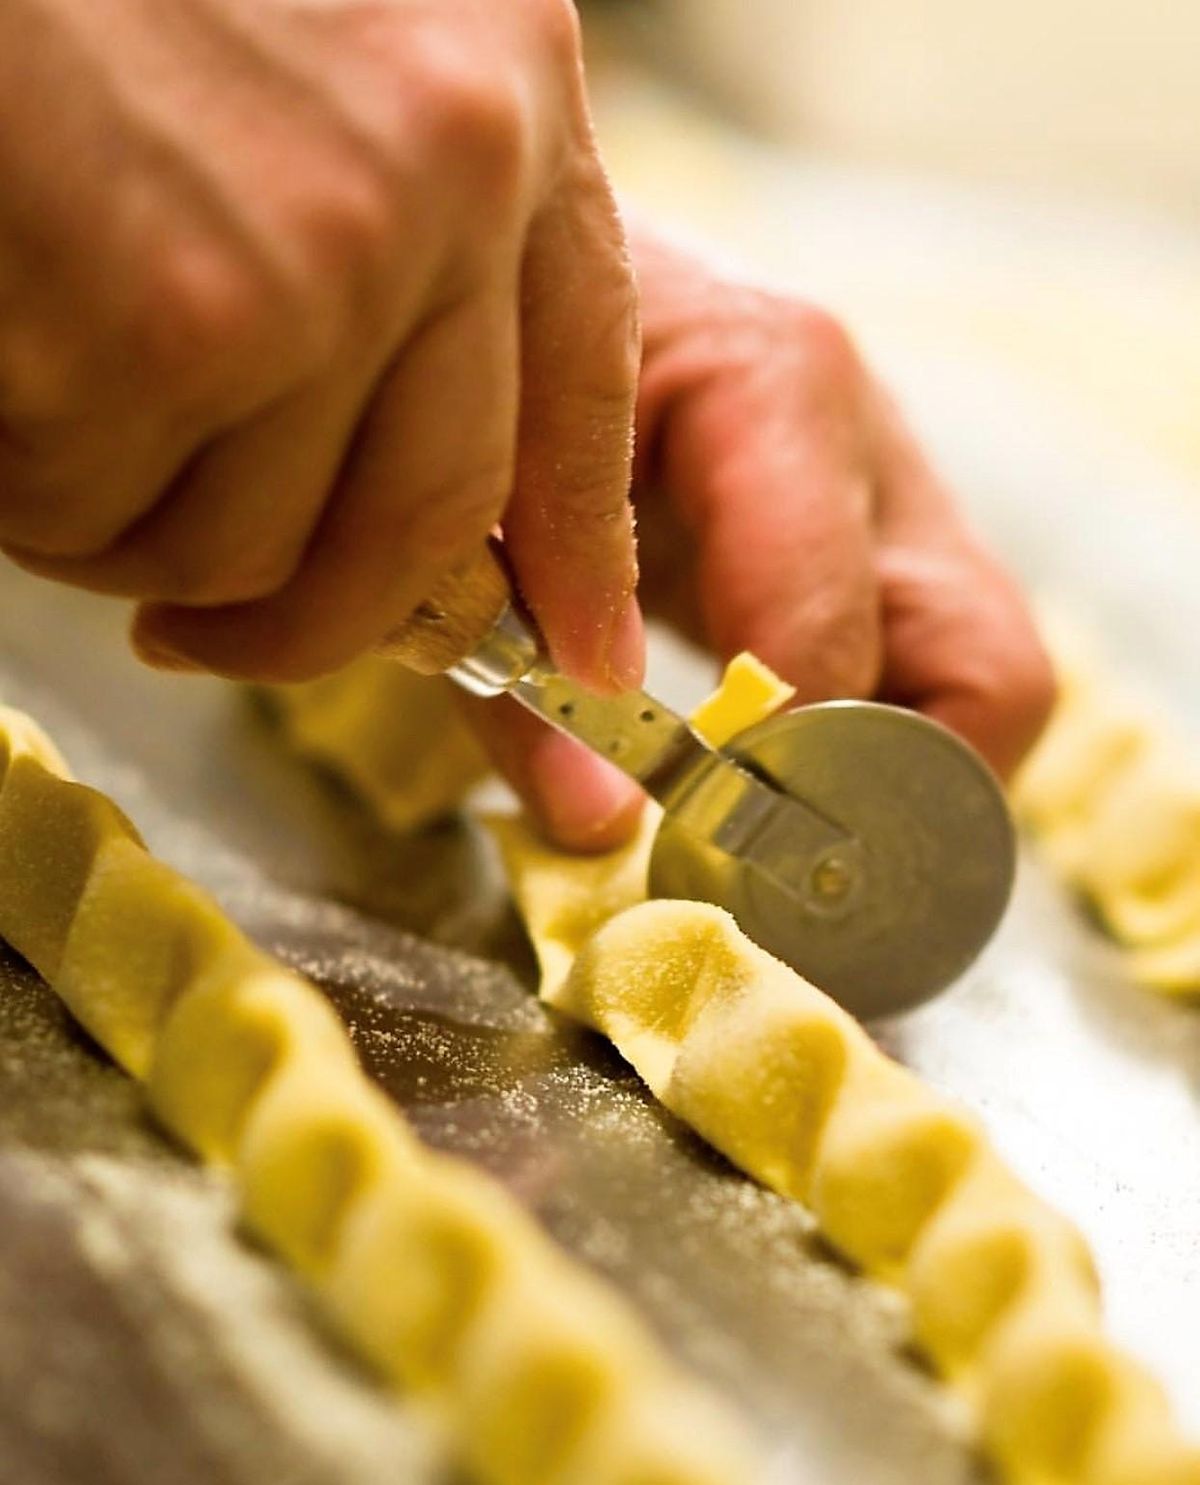 Wine Tasting & Pasta Making at Scarpetta with Chef Michael Loughlin